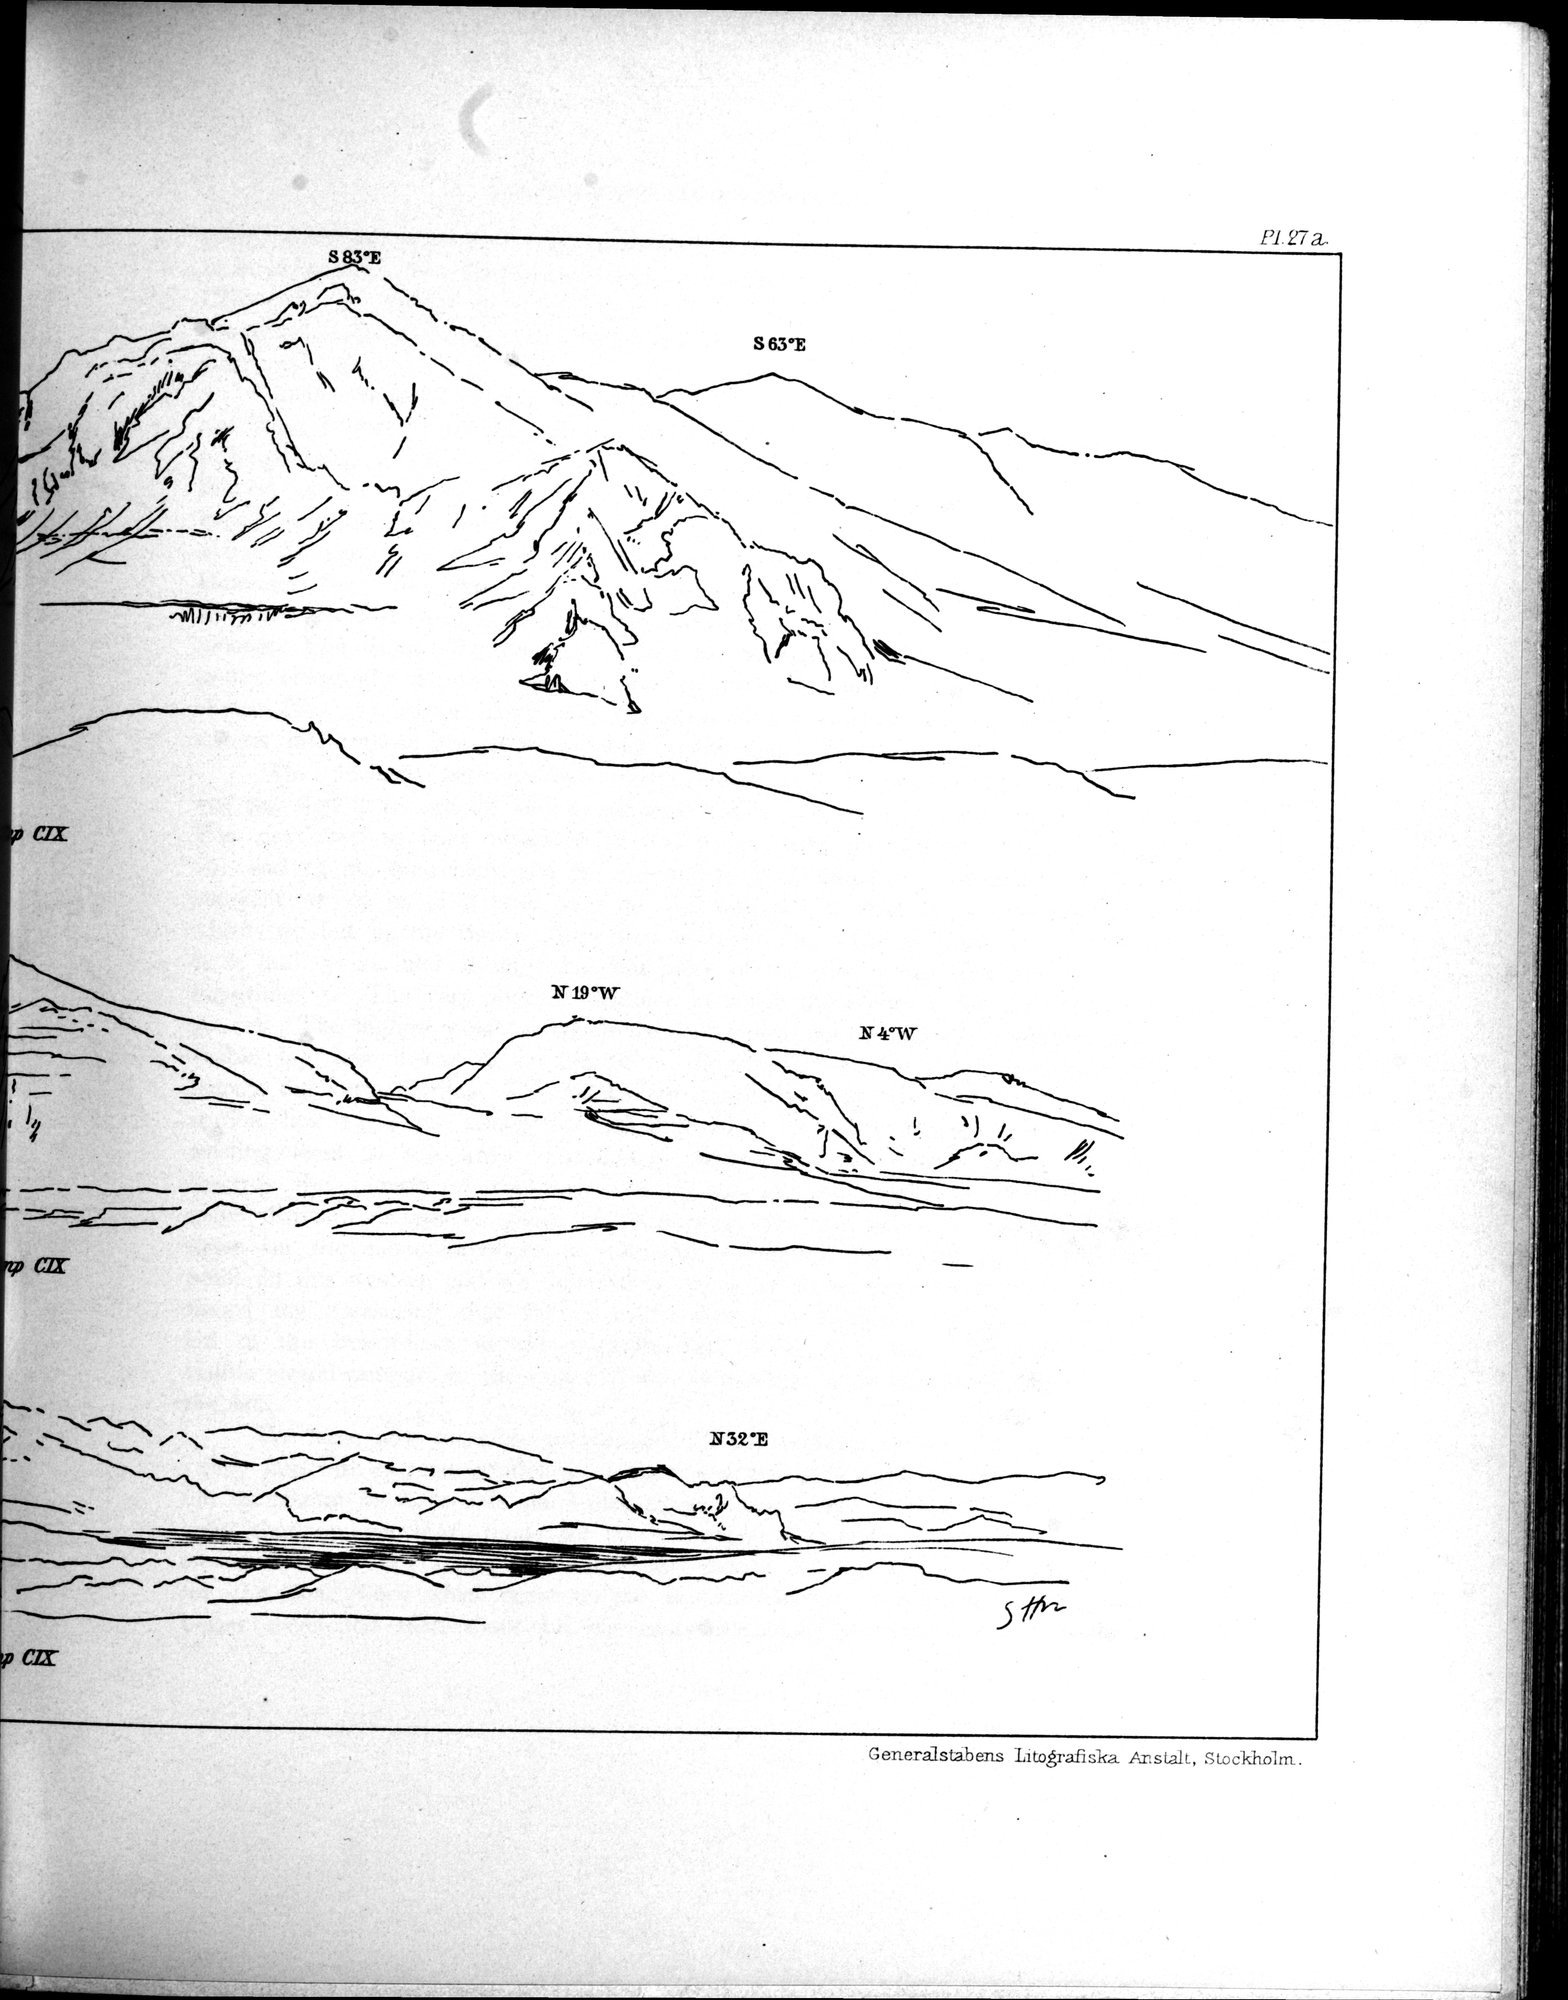 Scientific Results of a Journey in Central Asia, 1899-1902 : vol.4 / 239 ページ（白黒高解像度画像）